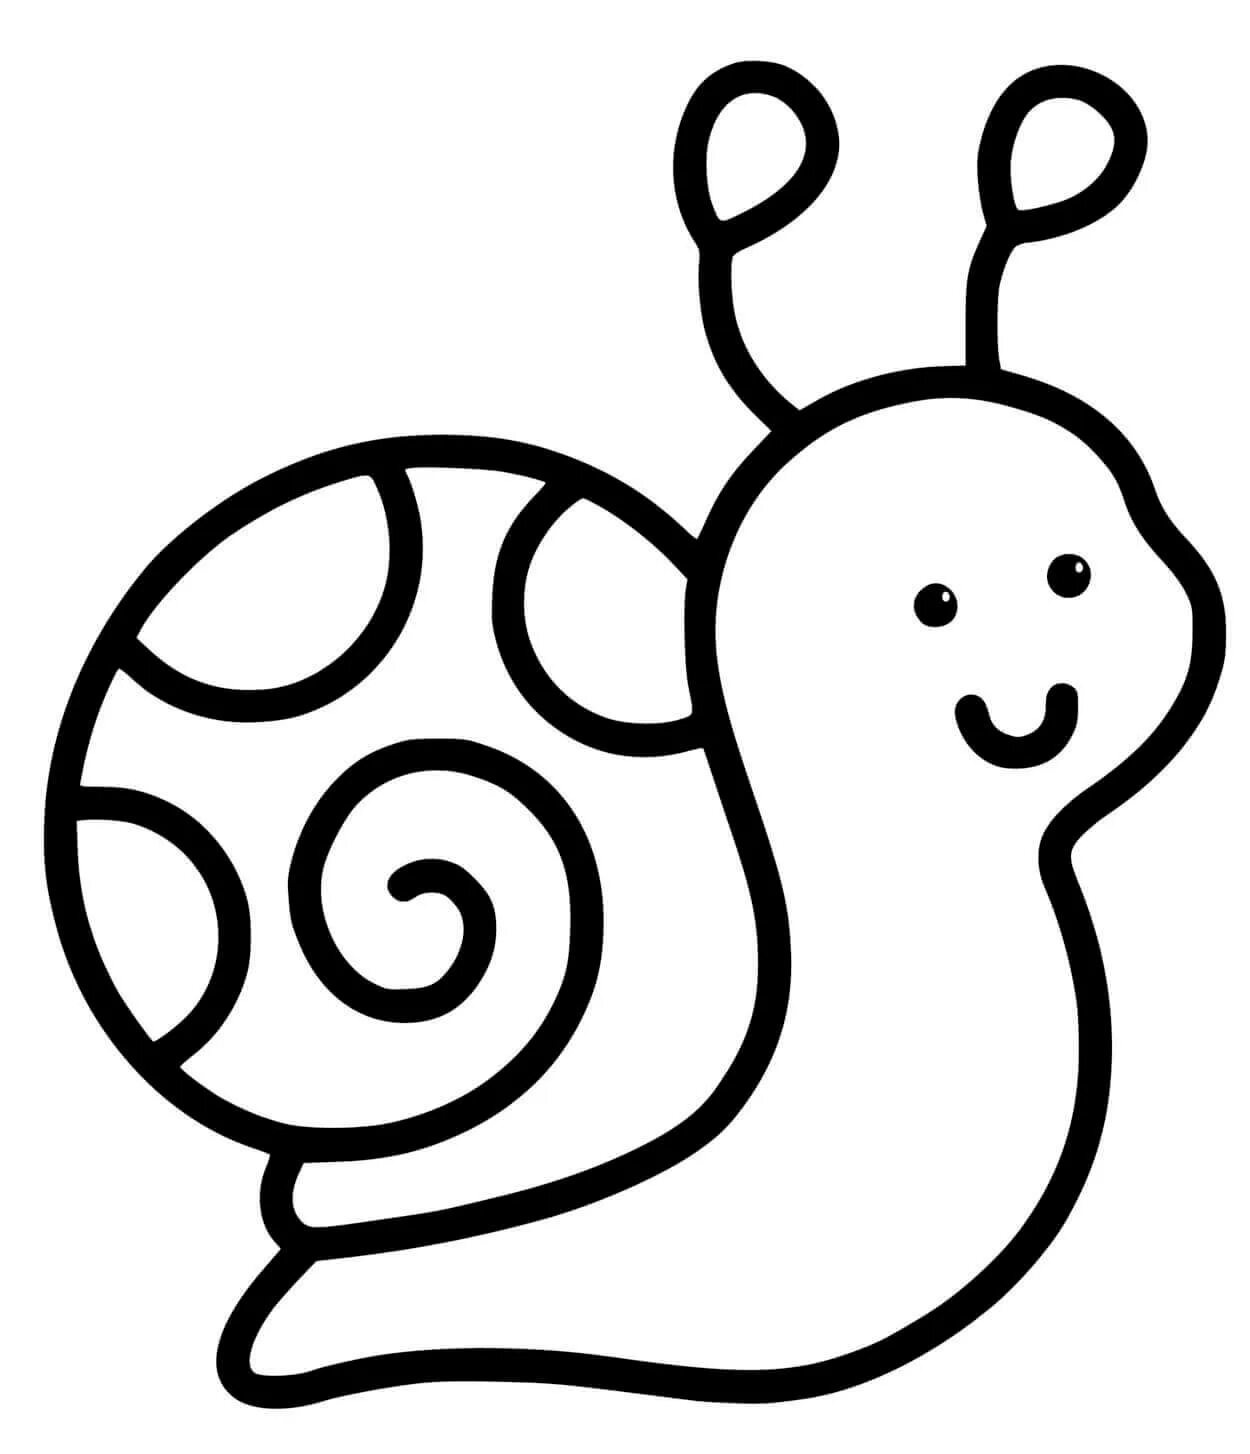 Snail for children 3 4 years old #6